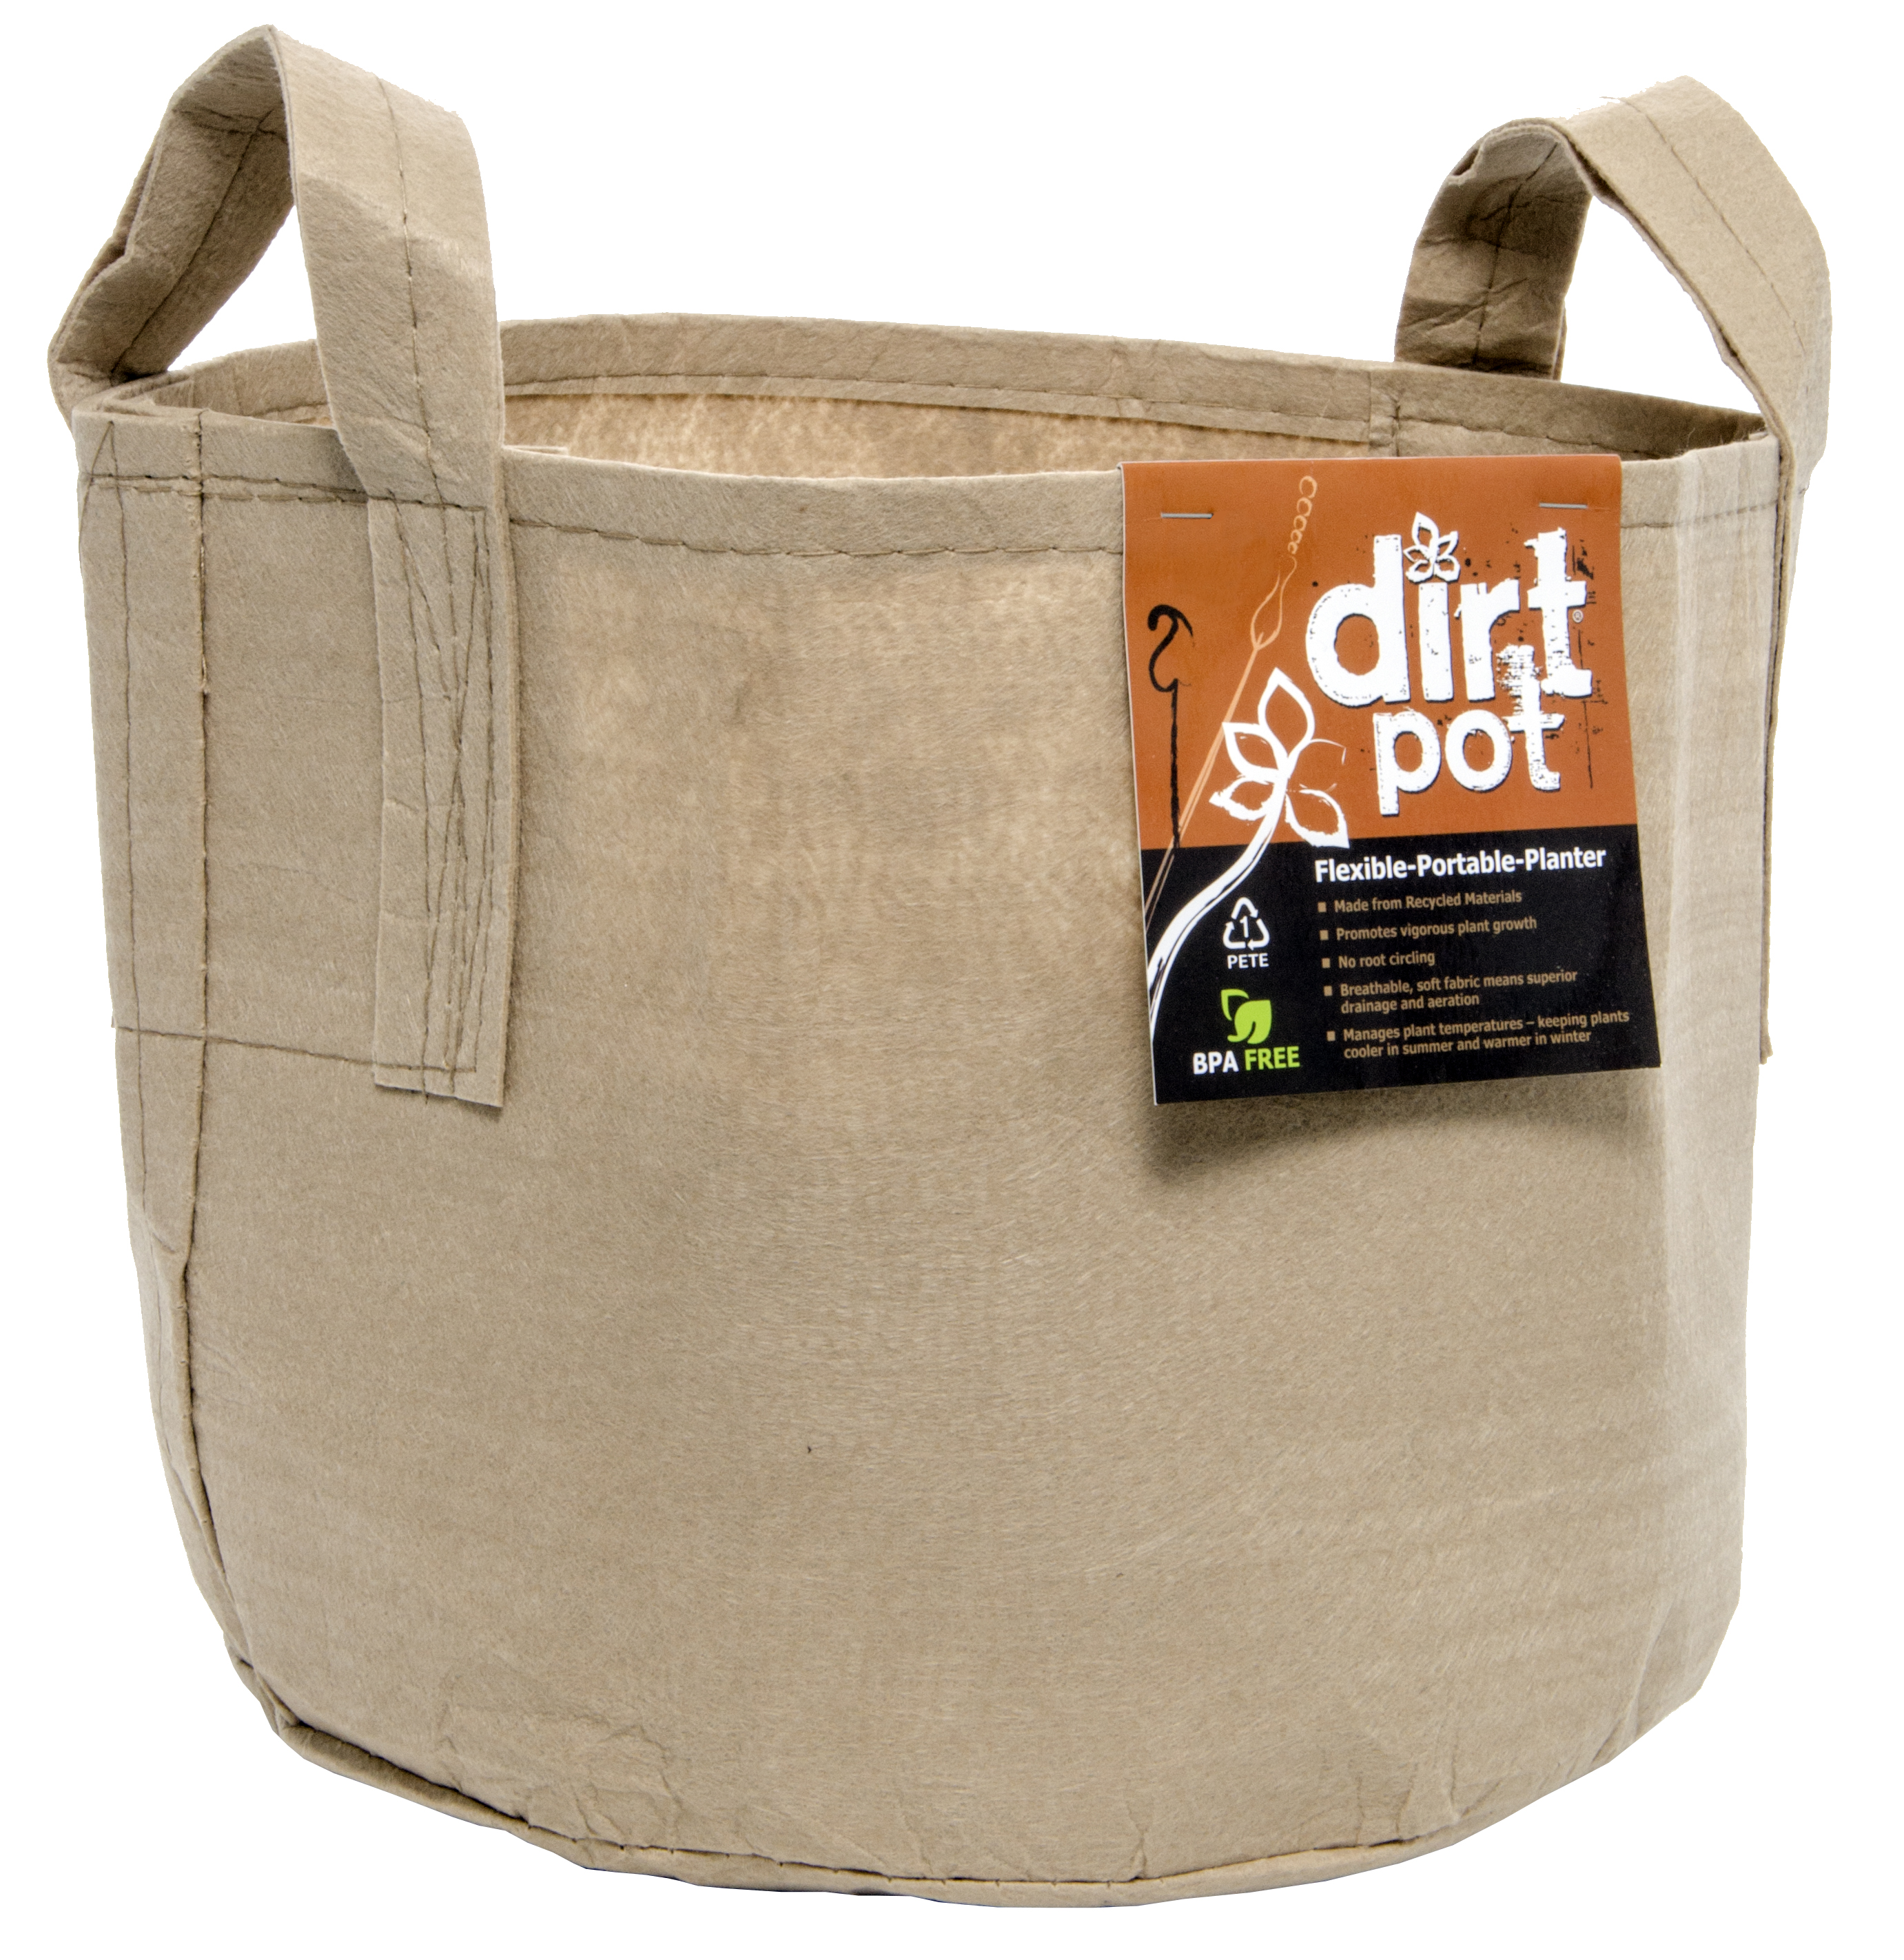 Picture for Dirt Pot Flexible Portable Planter, Tan, 45 gal, with handles